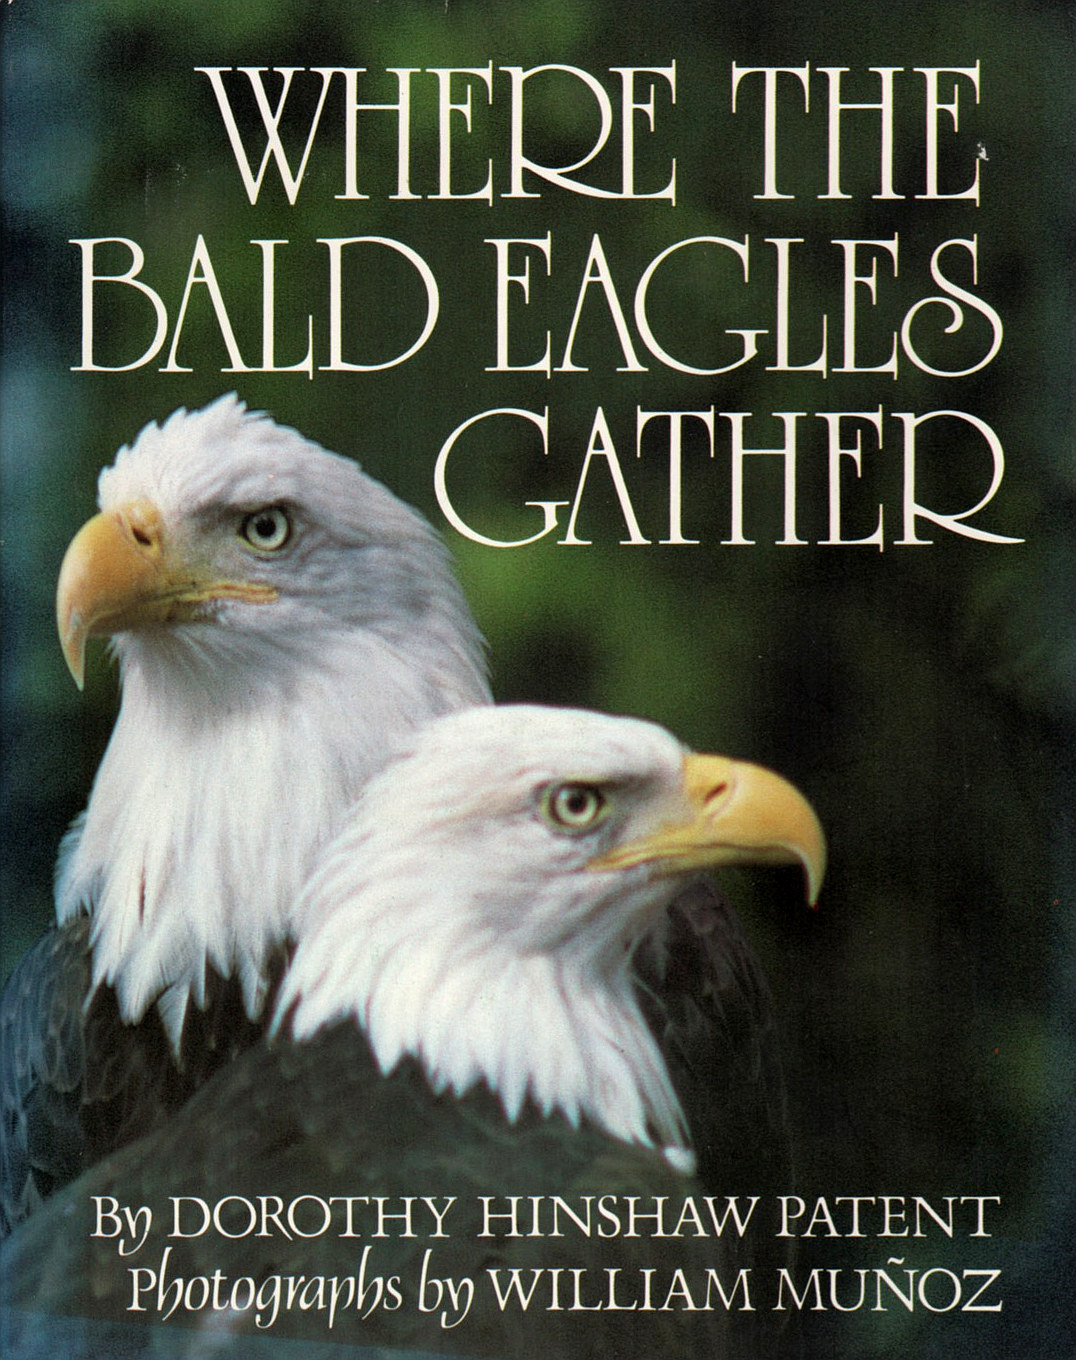 Where the Bald Eagles Gather (Dorothy Hinshaw Patent)